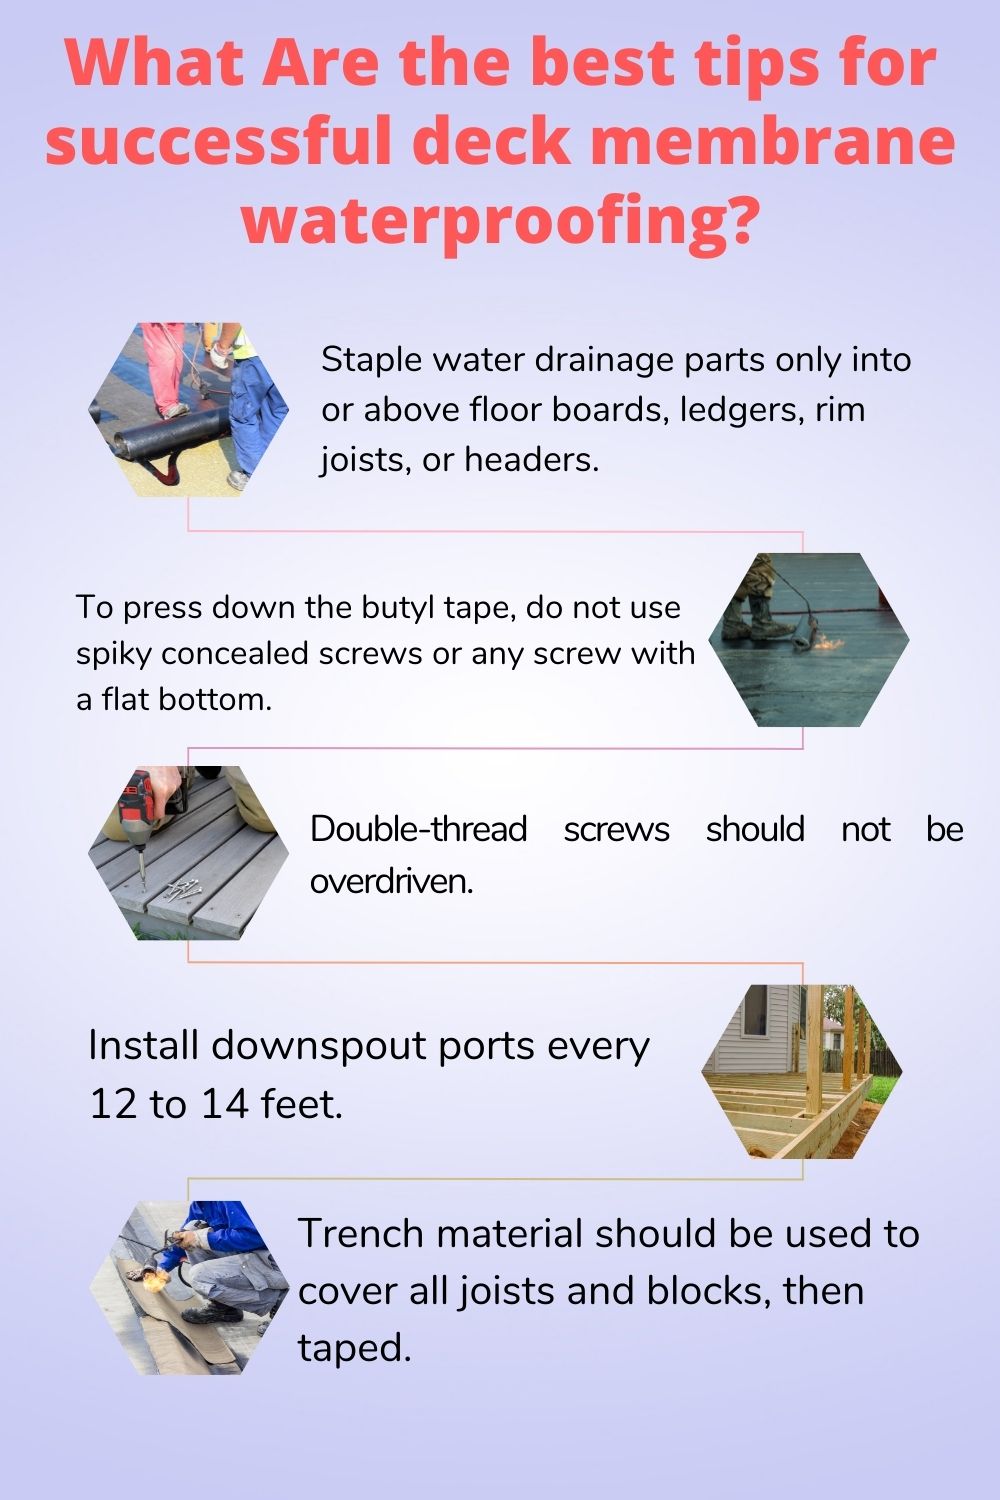 What Are the best tips for successful deck membrane waterproofing?